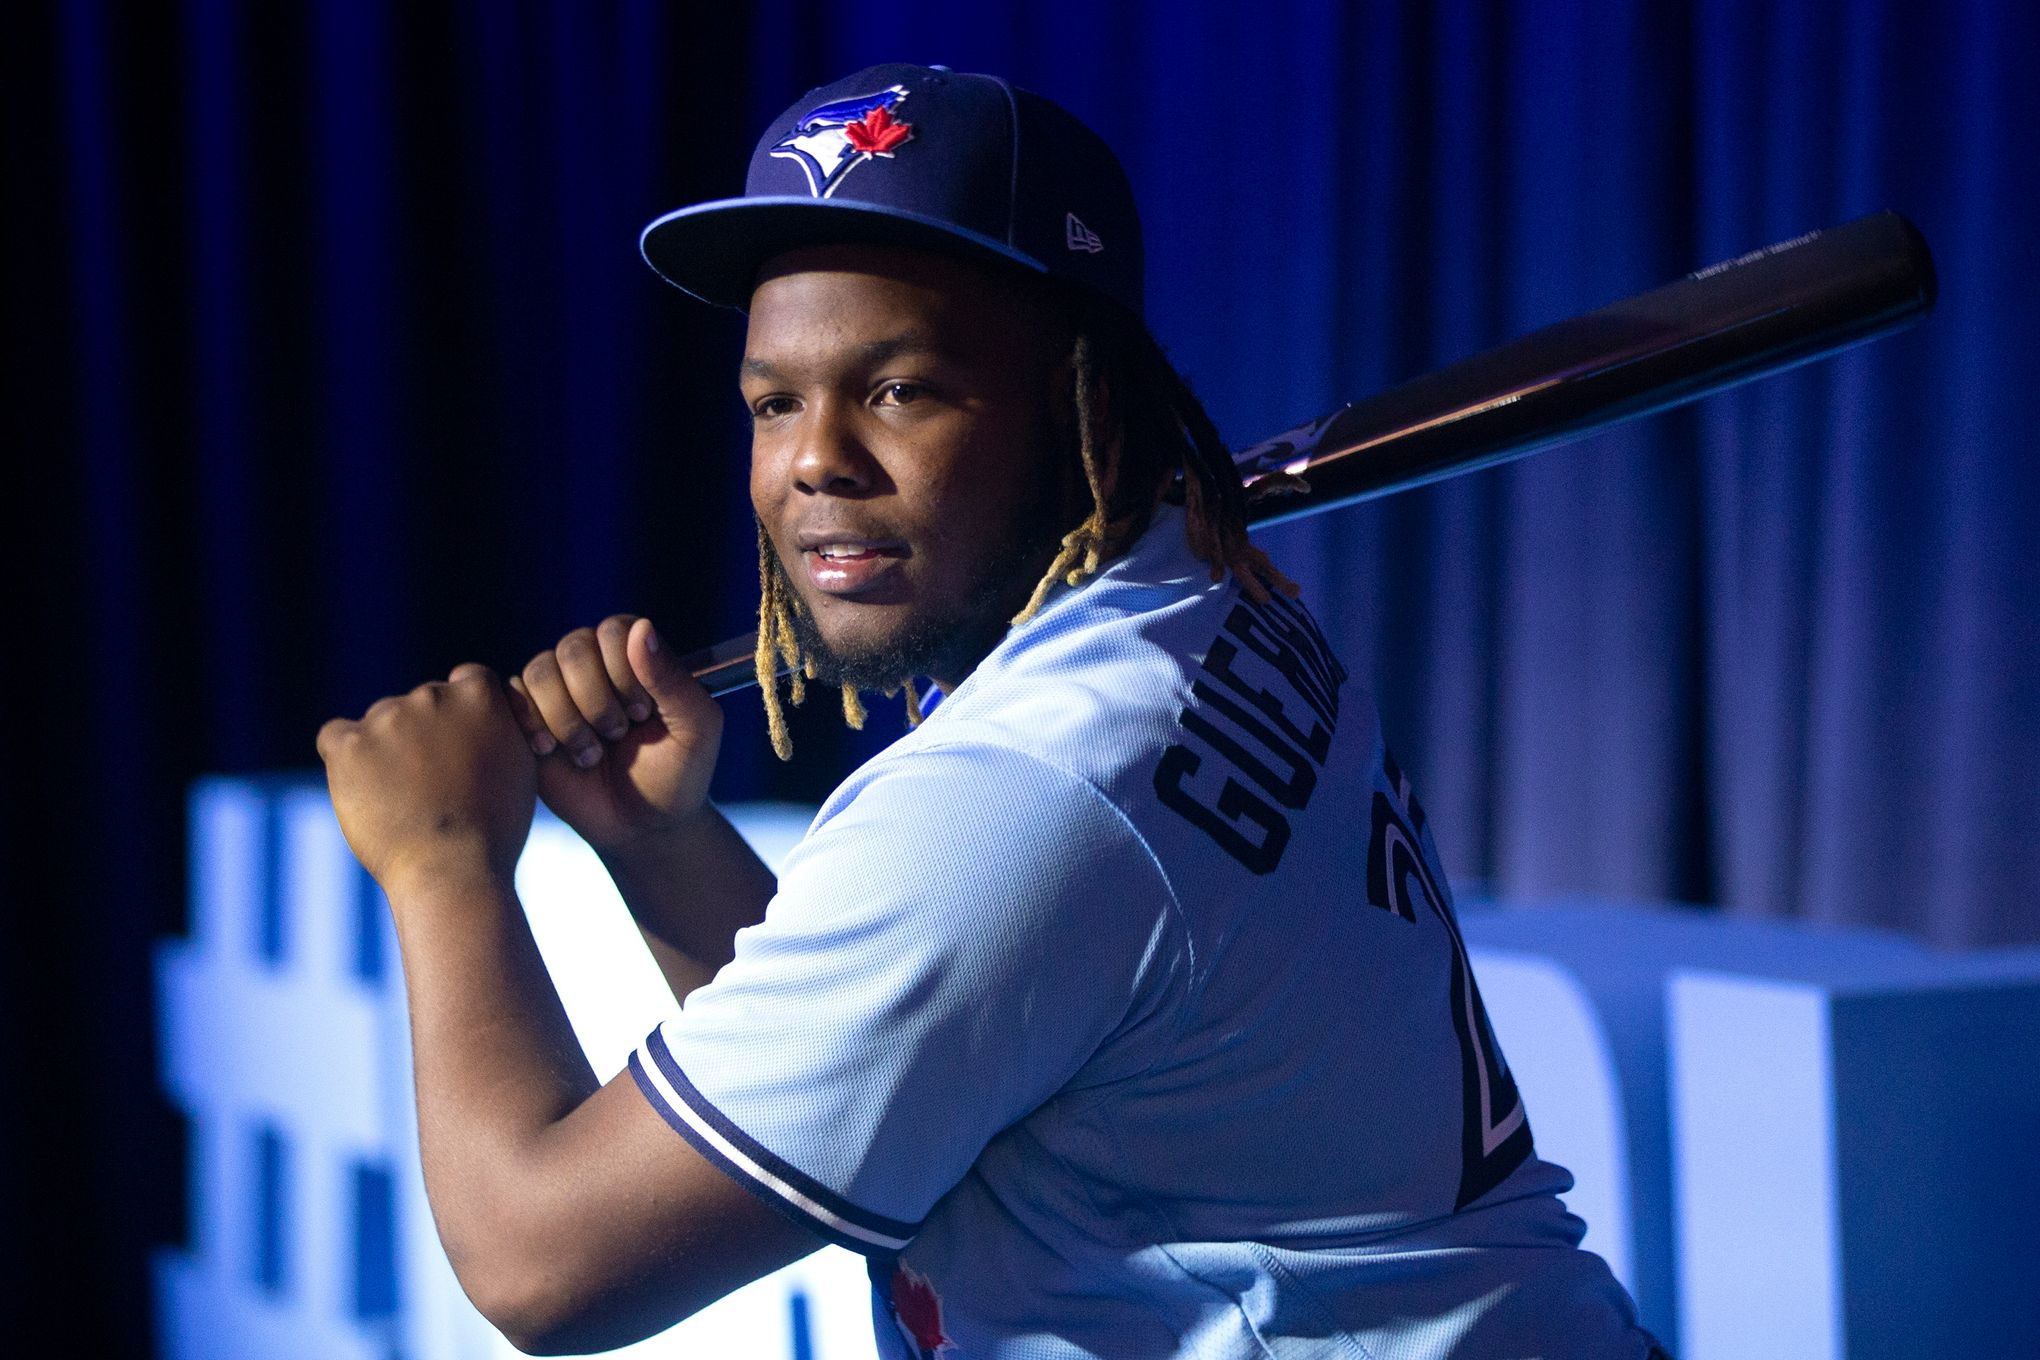 Vlad Jr. dropping weight: 'I got to work at once' after season